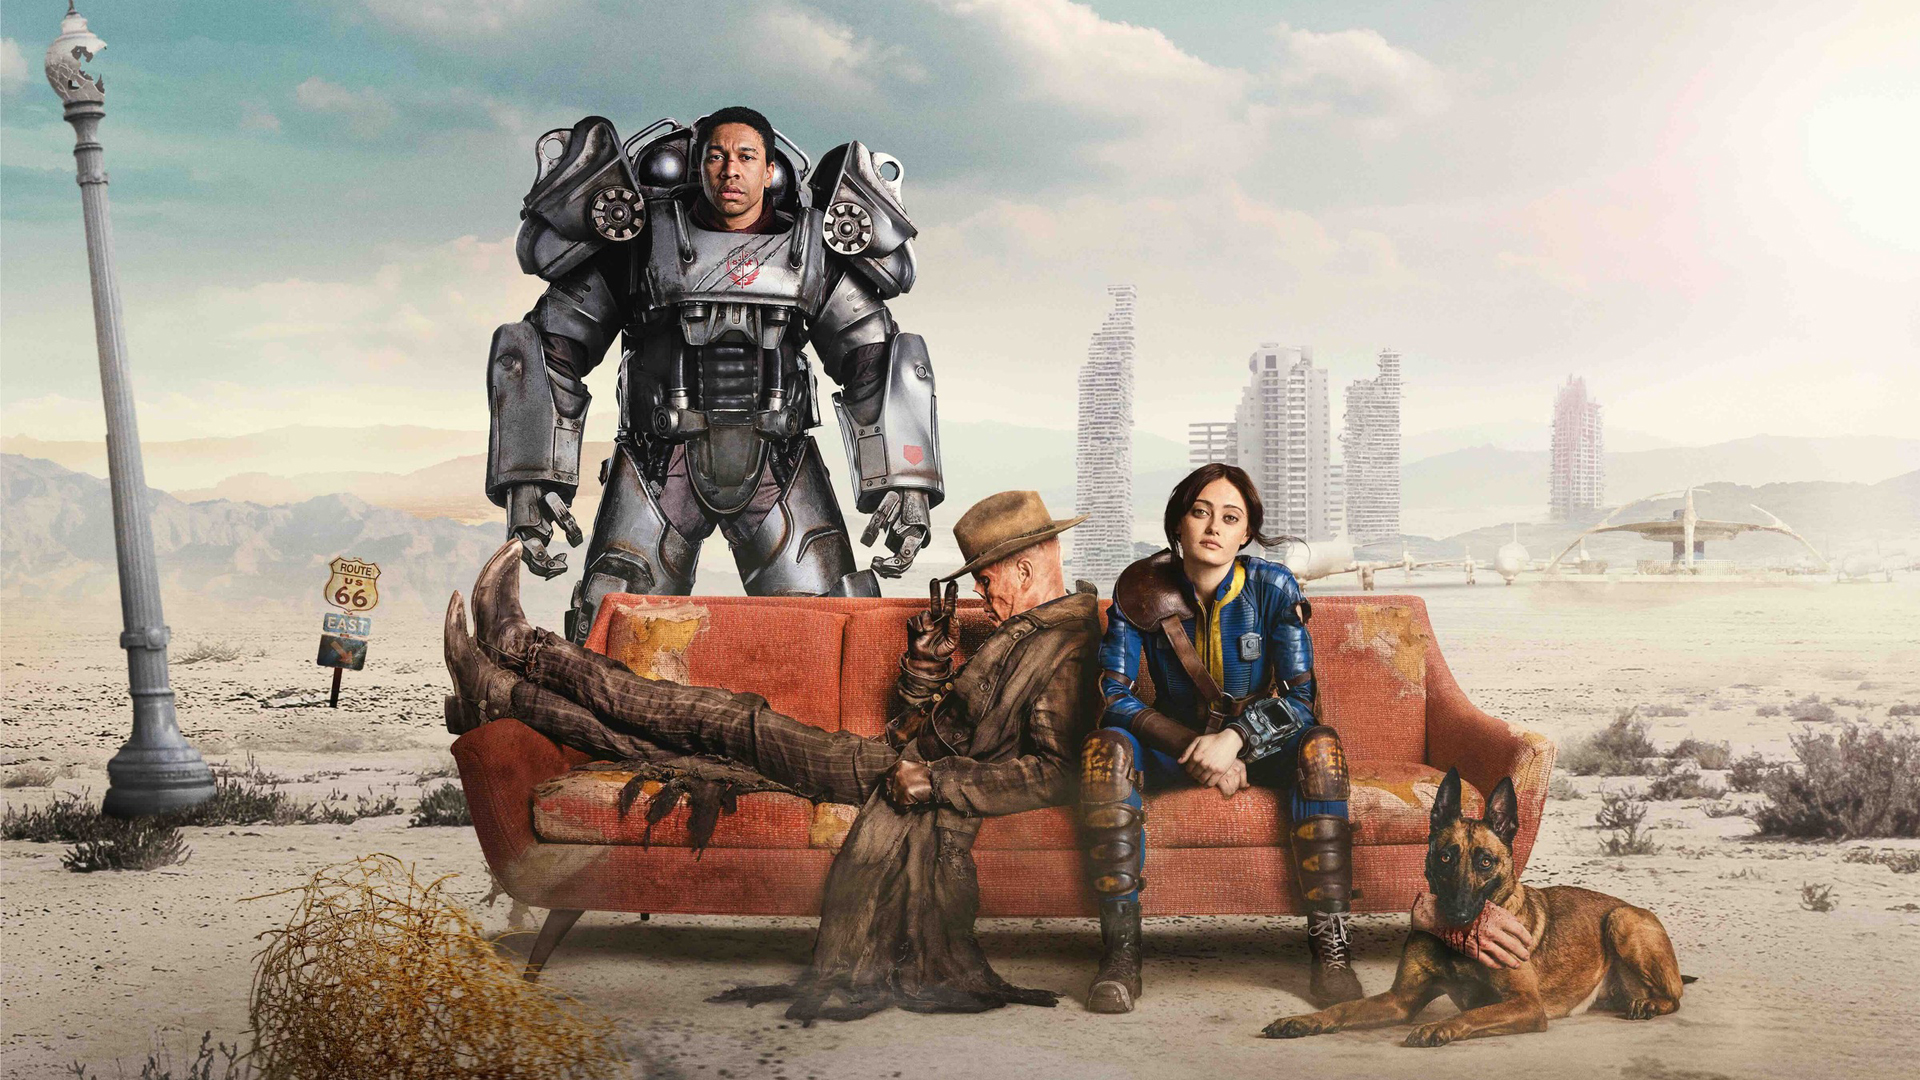 A promotional poster for Amazon's Fallout television show, featuring Maximus, The Ghoul, Lucy, and Dogmeat.